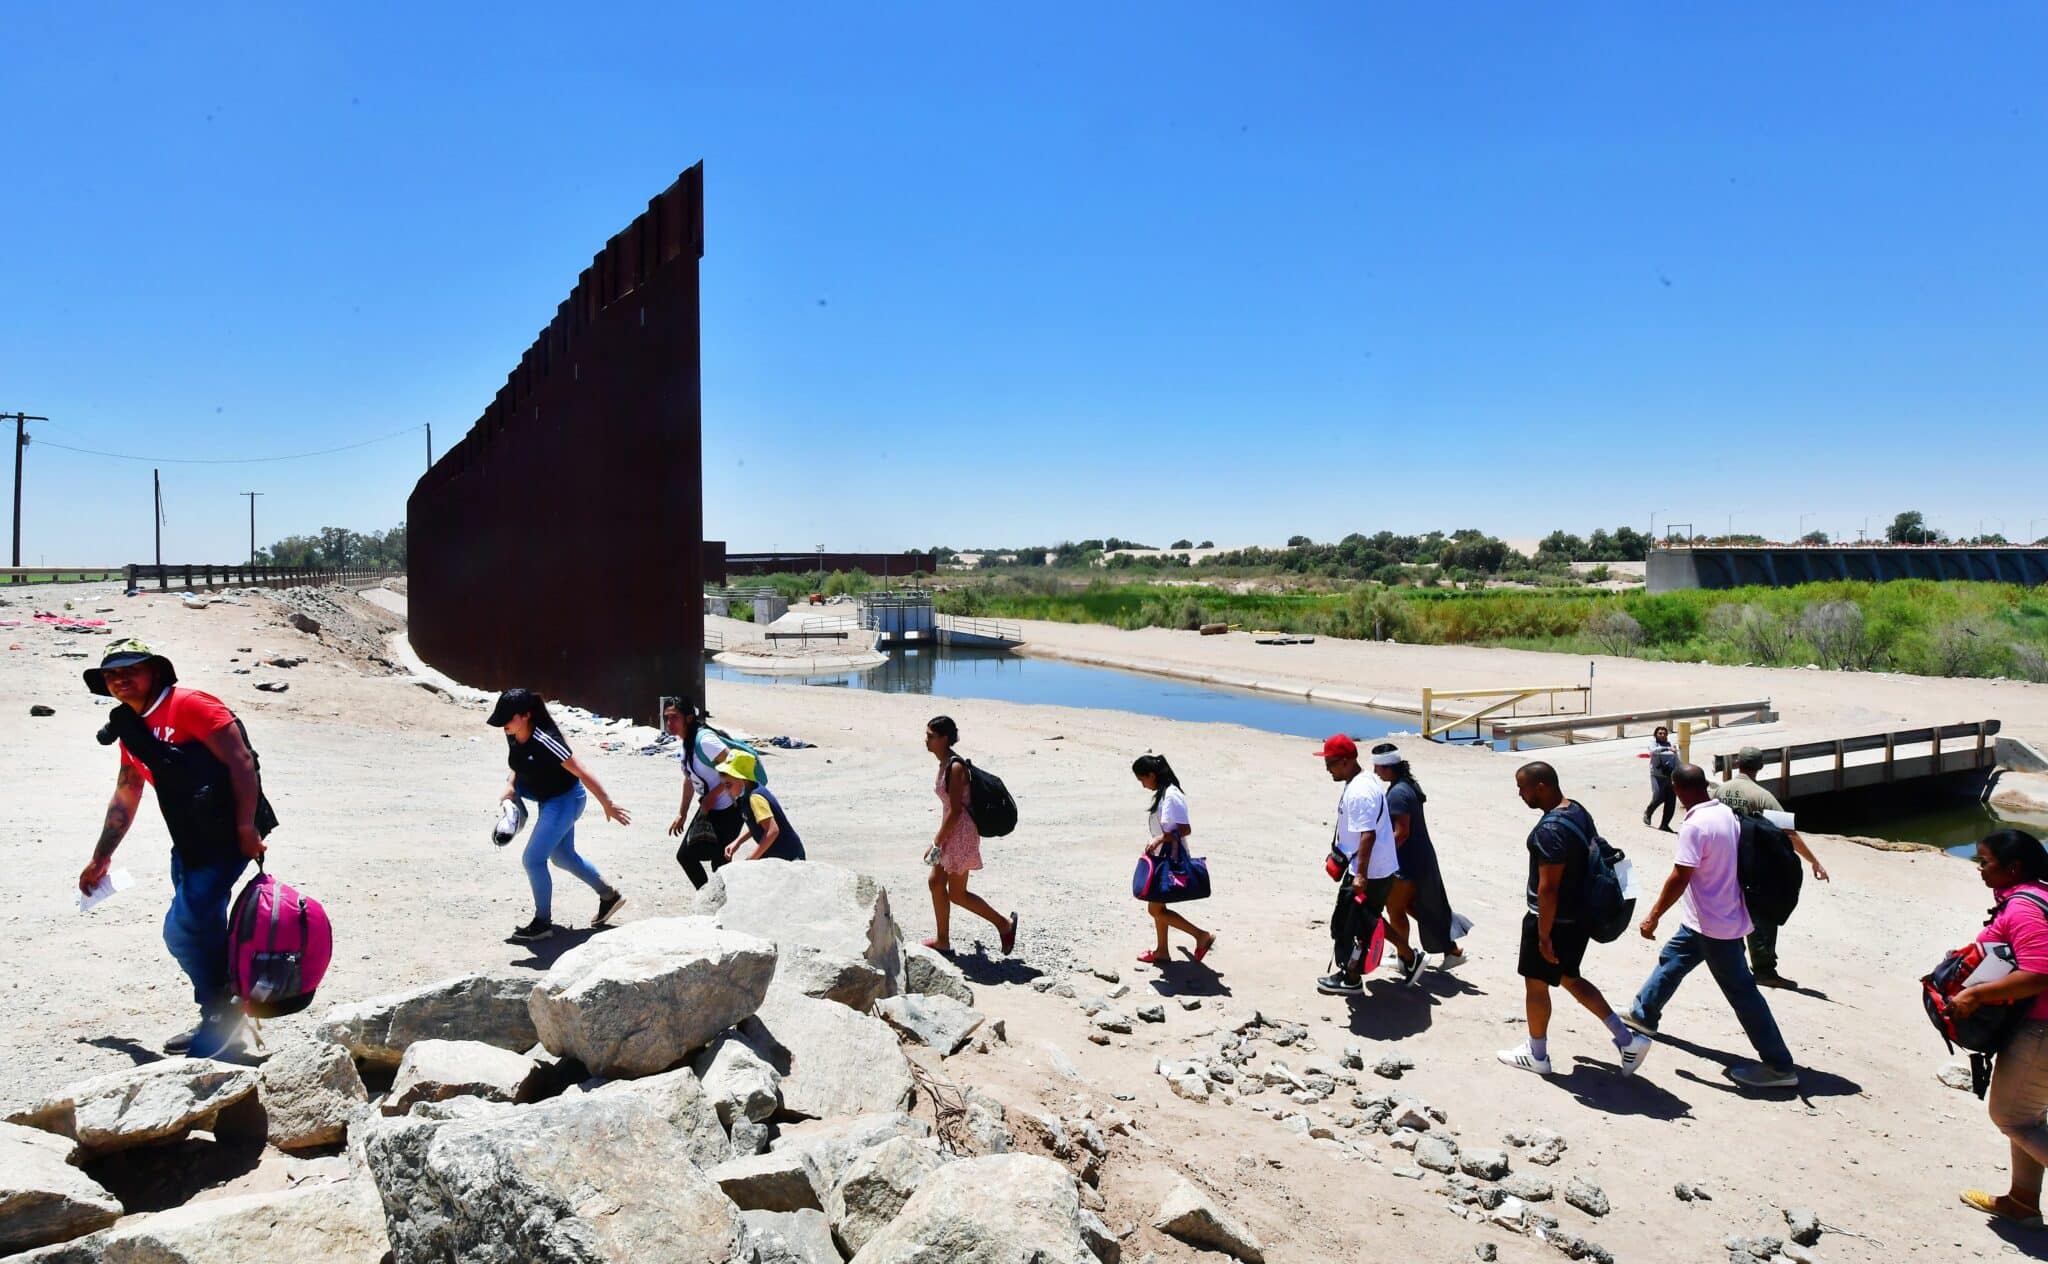 Migrants cross into the US from the Mexico through a gap in the border wall separating the Mexican town of Algodones from Yuma, Arizona, on May 16, 2022. - A US Federal judge is expected to make a ruling on health policy Title 42 which has been used at the border to expel illegal immigrants due to the Covid-19 pandemic. (Photo by Frederic J. BROWN / AFP) (Photo by FREDERIC J. BROWN/AFP via Getty Images)